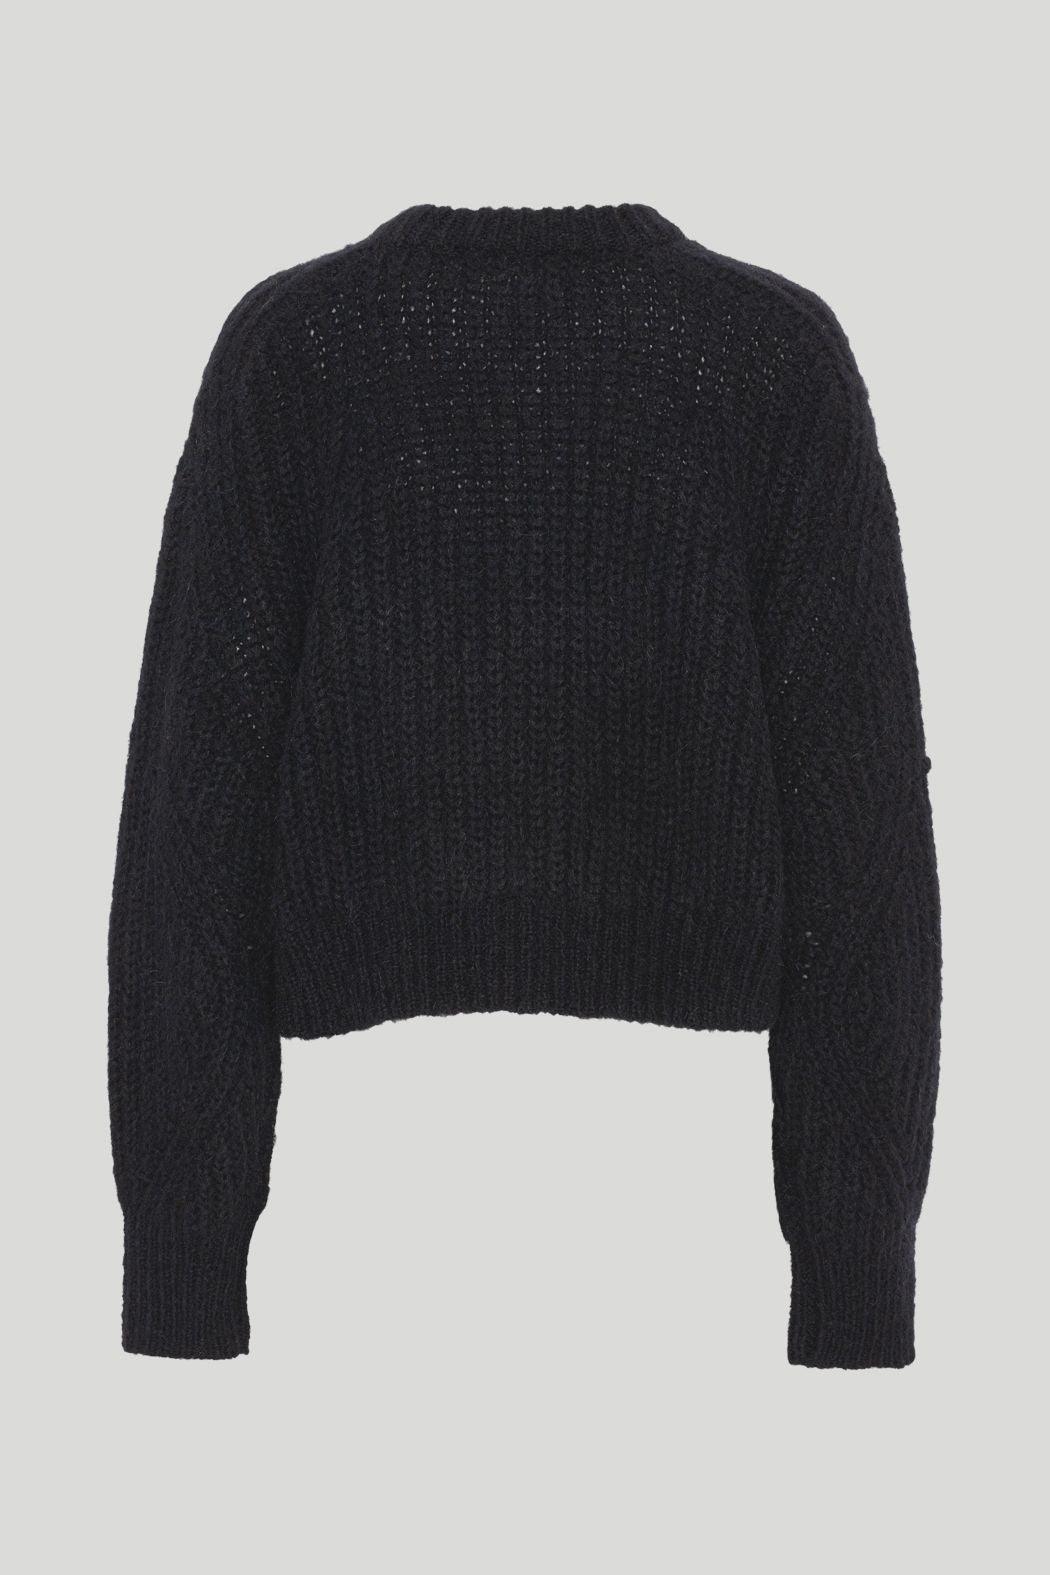 Rotate Remain - Shandy Black Logo Knit - 32 The Guild 